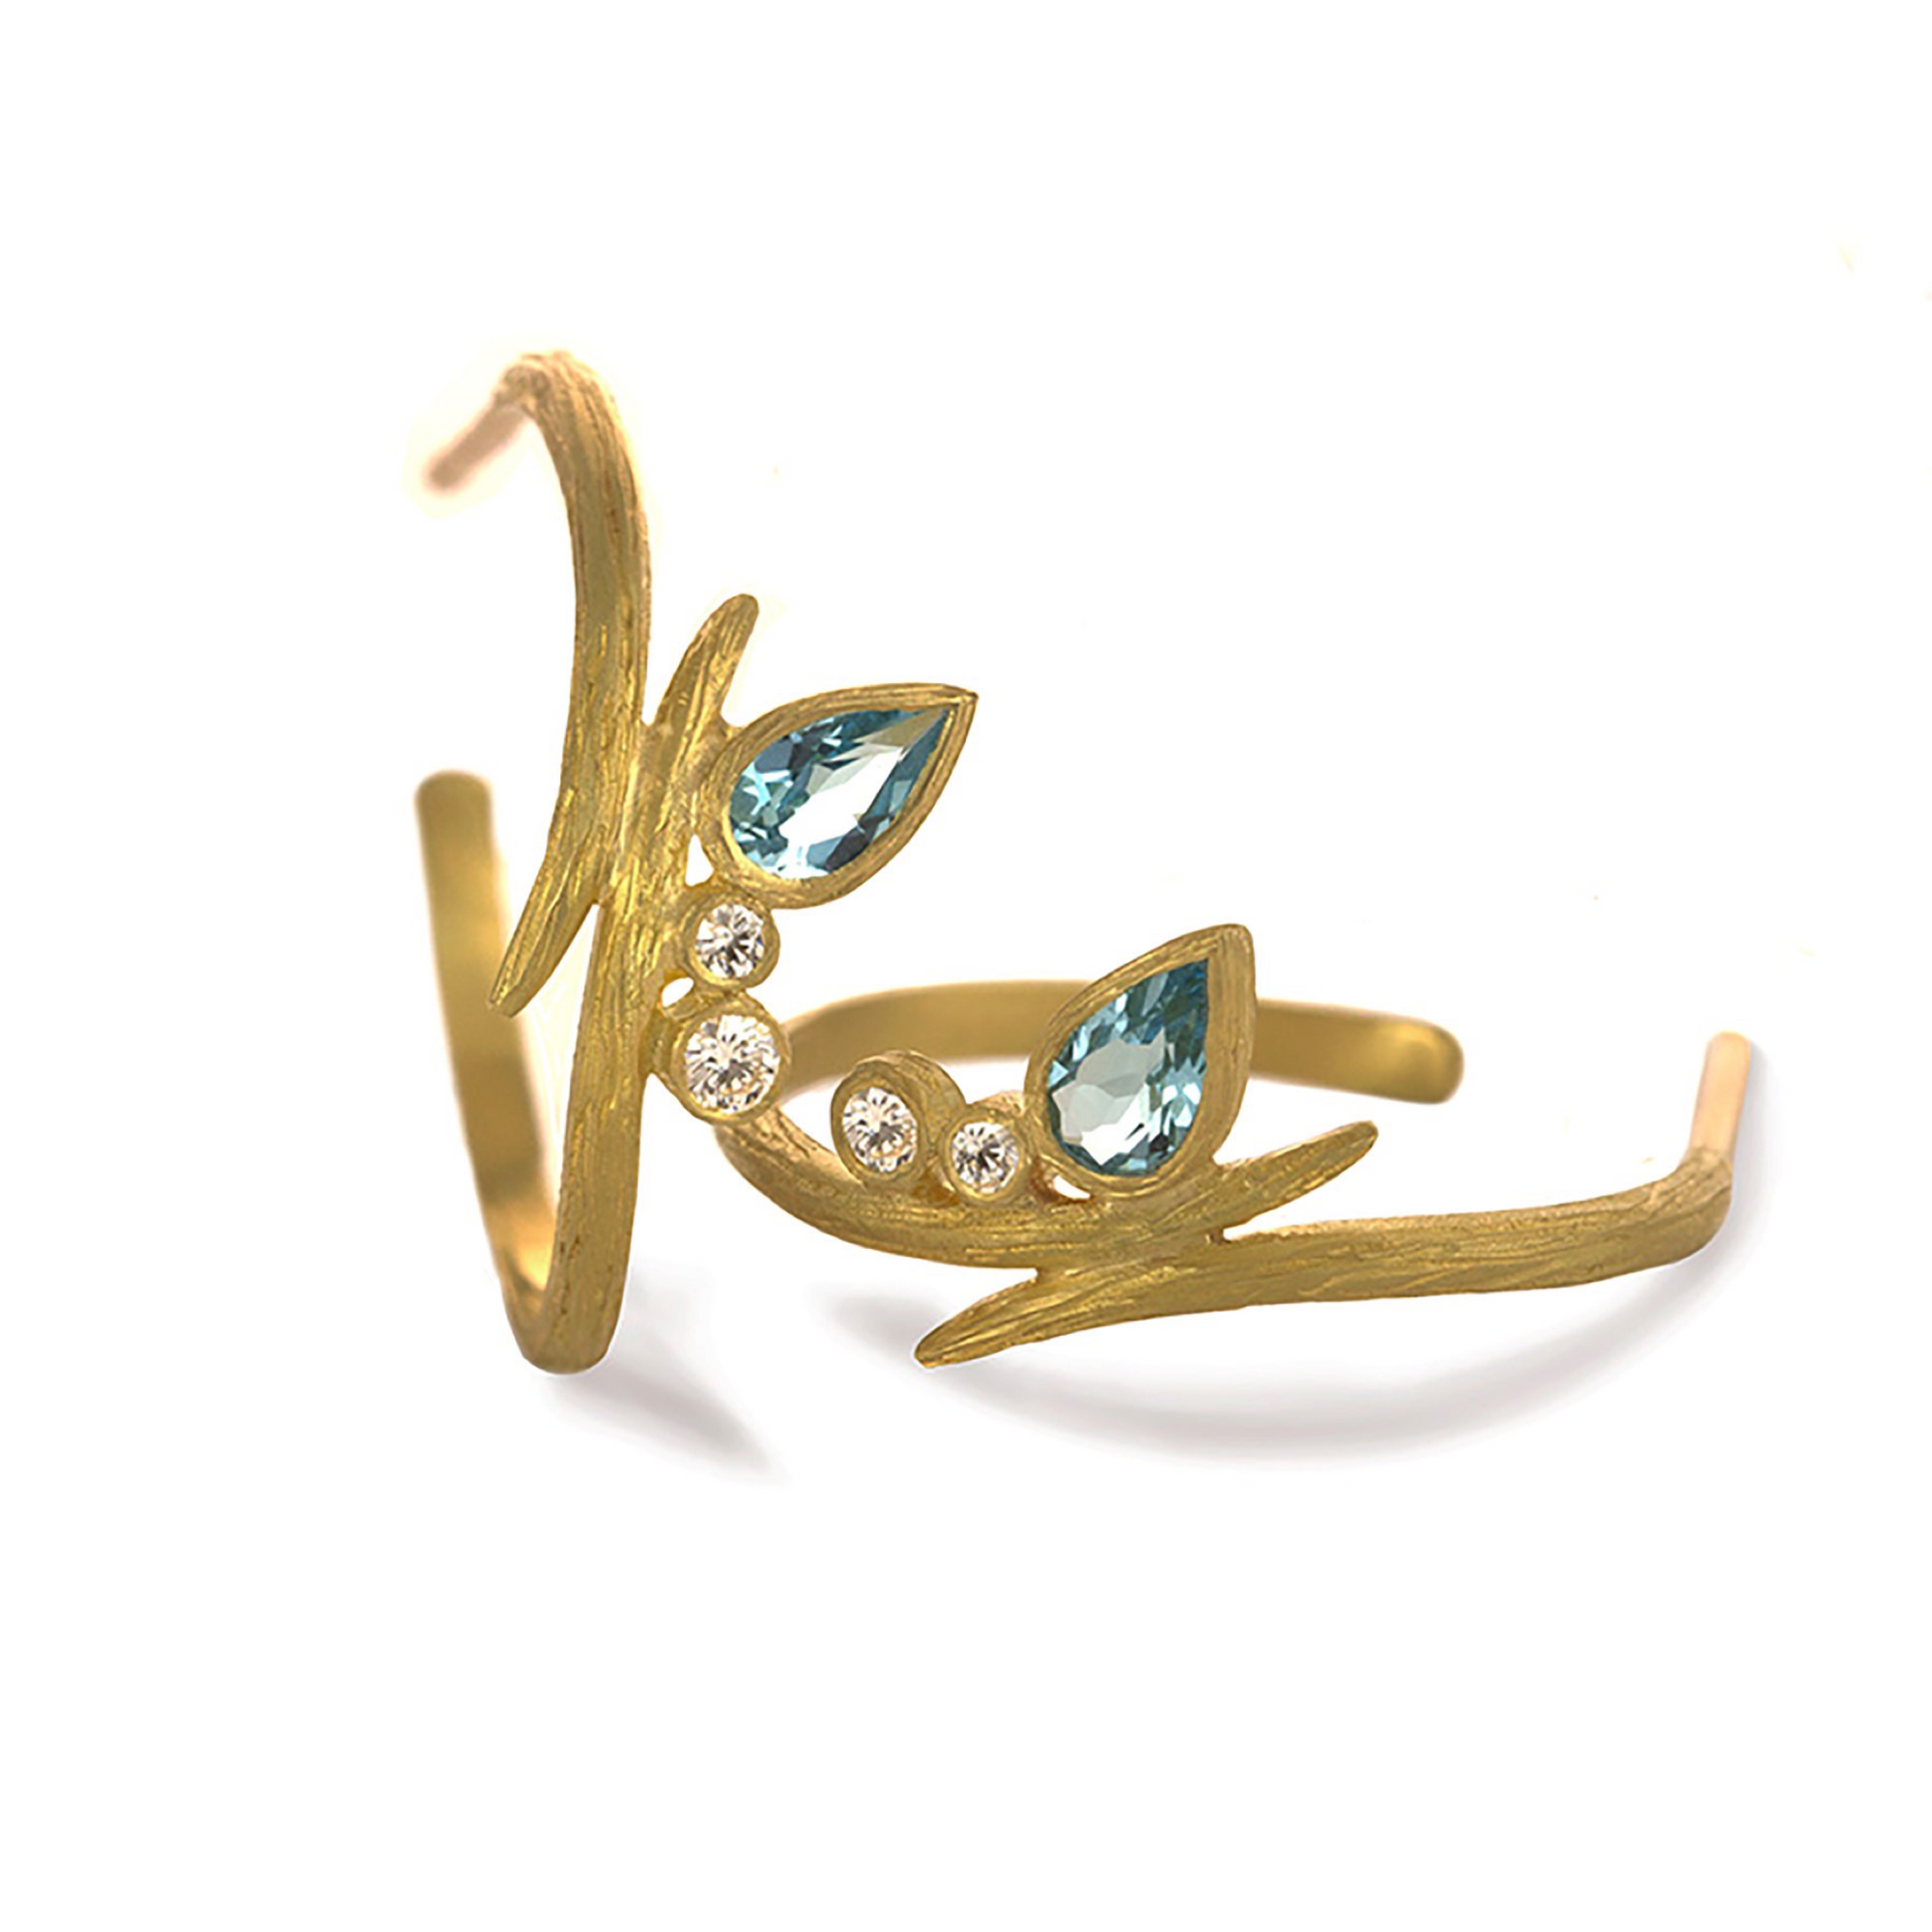 Sky Blue Topaz Vine Hoop Earrings by Laurie Kaiser available at Talisman Collection Fine Jewelers in El Dorado Hills, CA and online. These playful earrings are made of 18k yellow gold and feature bright, sky blue topaz stones, accented with 0.09 carats of brilliant white diamonds. The hoop diameter is 0.75 inches, making them the perfect size for everyday wear.